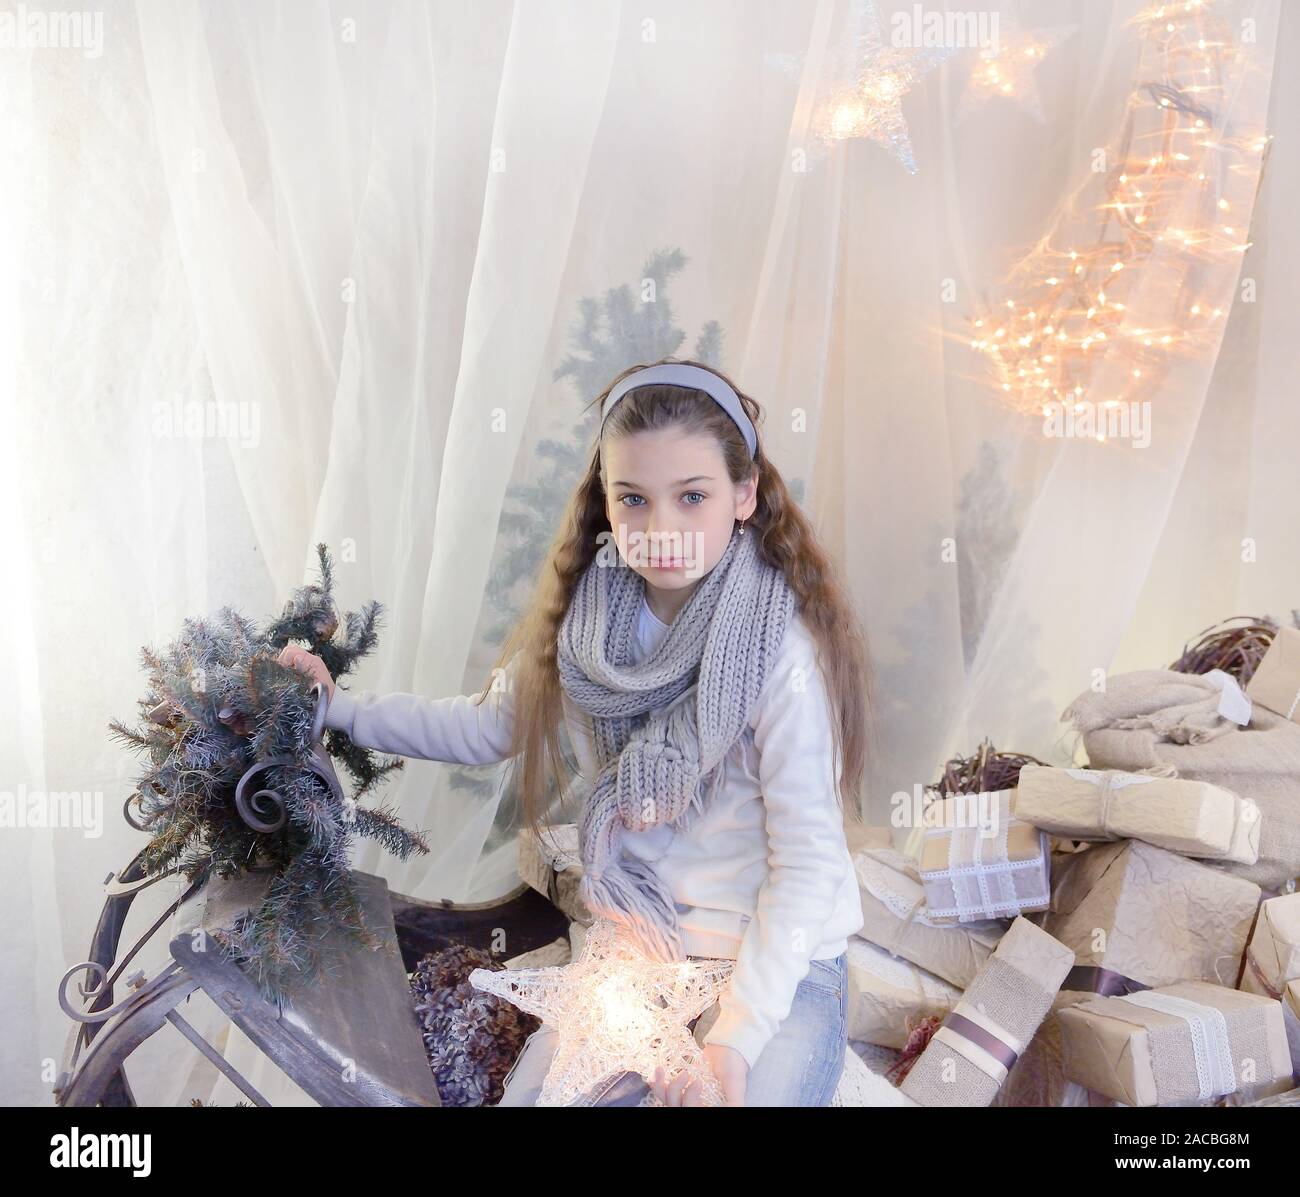 Girl child in beautiful CGirl child in beautiful Christmas decoratedhristmas decorated Stock Photo